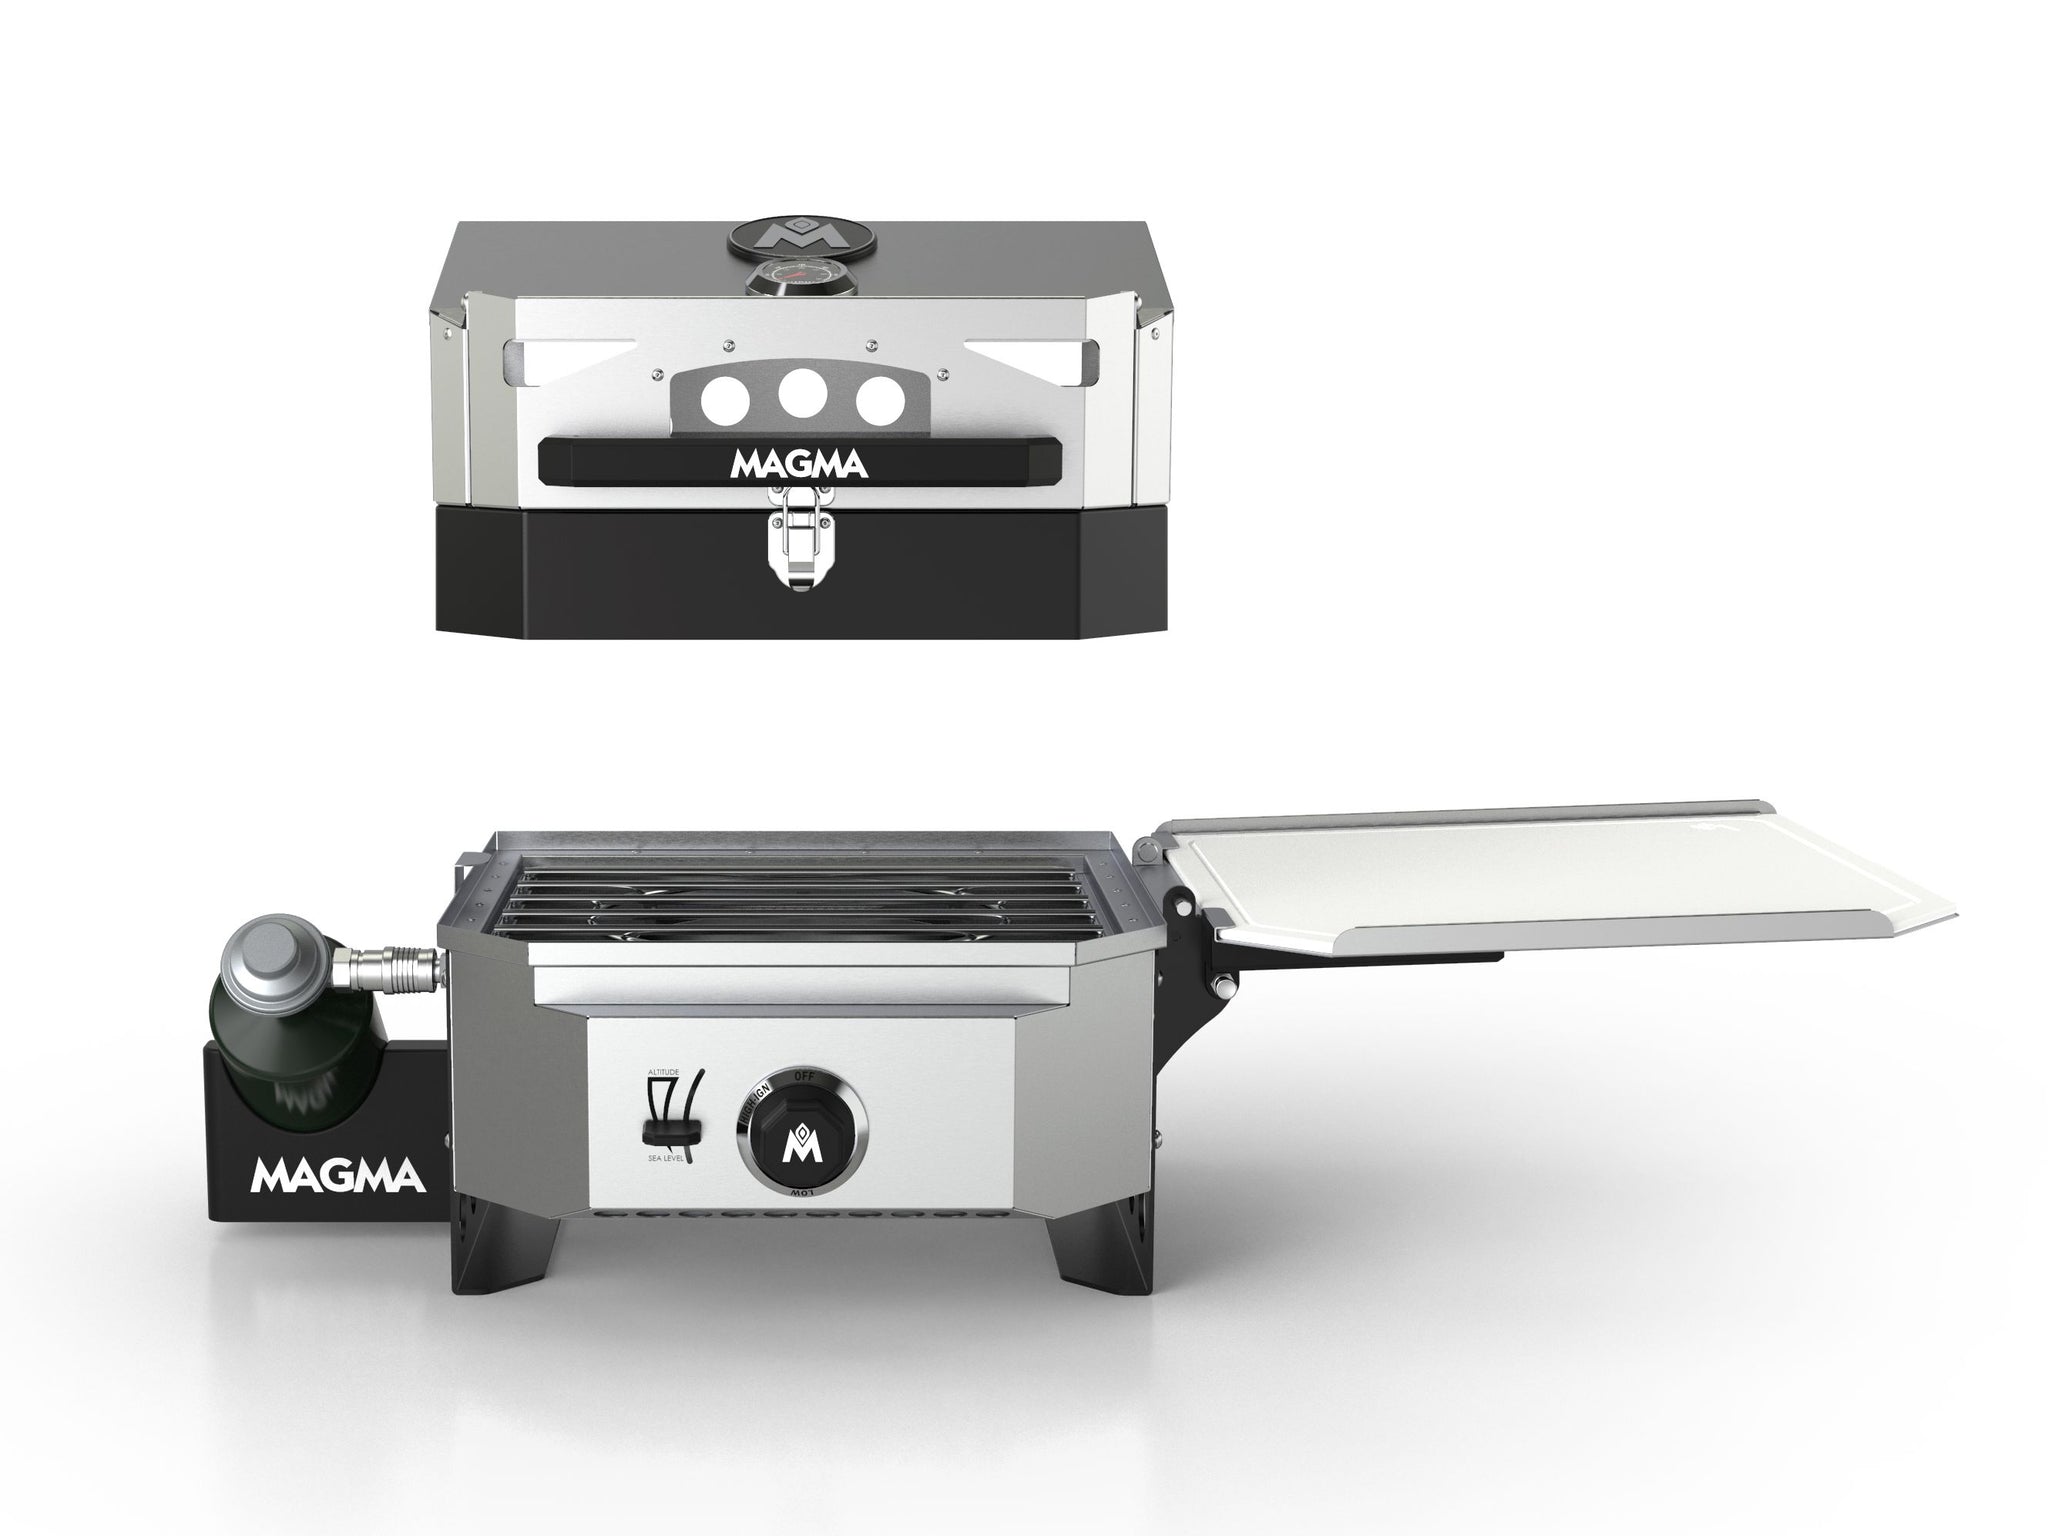 Magma Crossover Portable Grill, Griddle, Plancha, Pizza Top and Double  Burner for RV and outdoor use CO10-113 – Magma Products